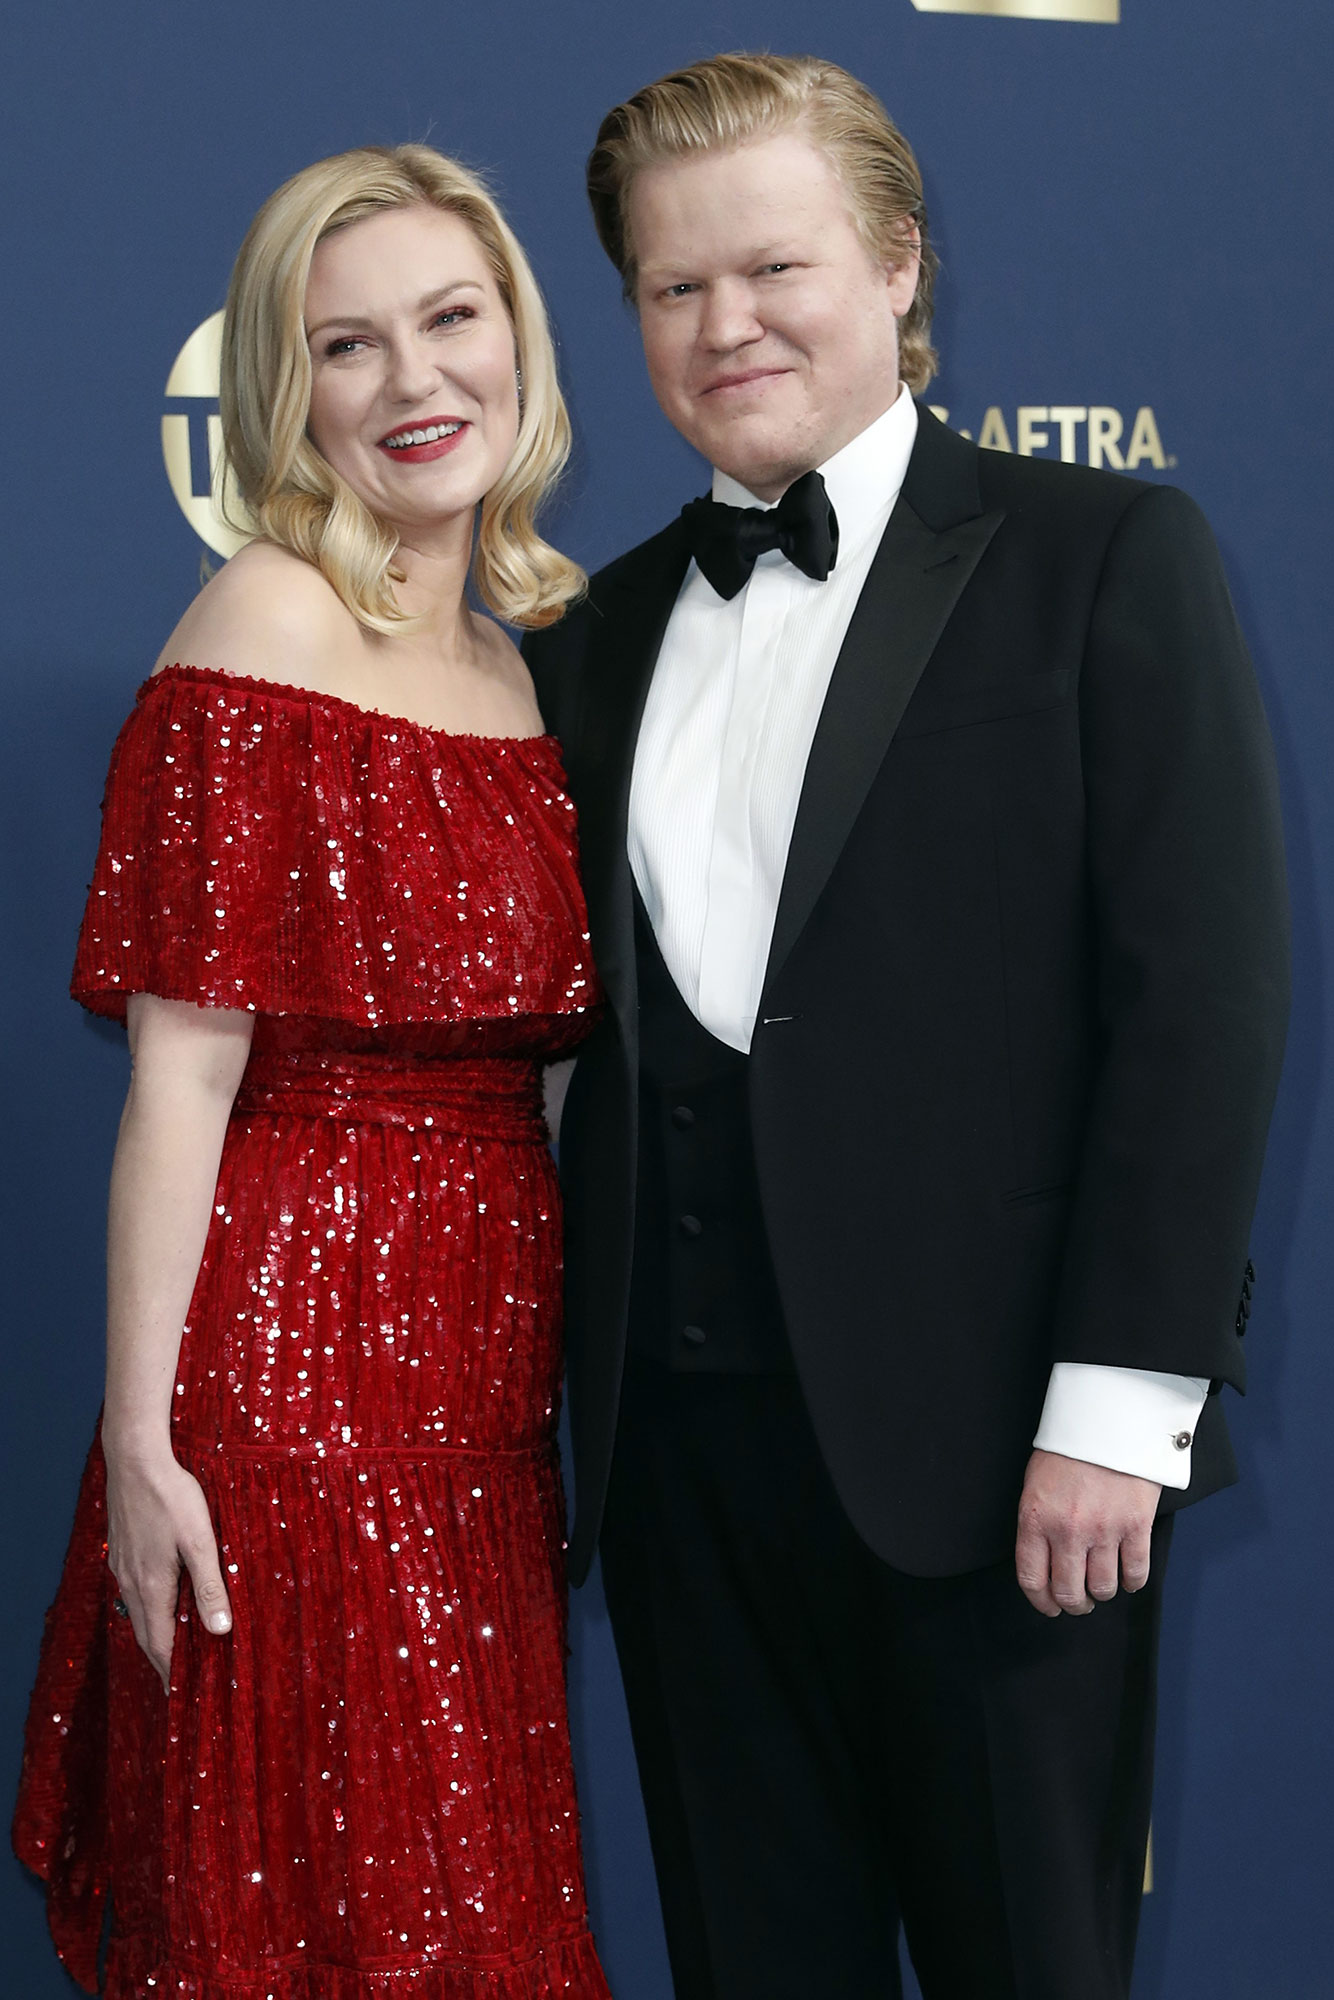 SAG Awards 2022: See the Hottest Couples on the Red Carpet